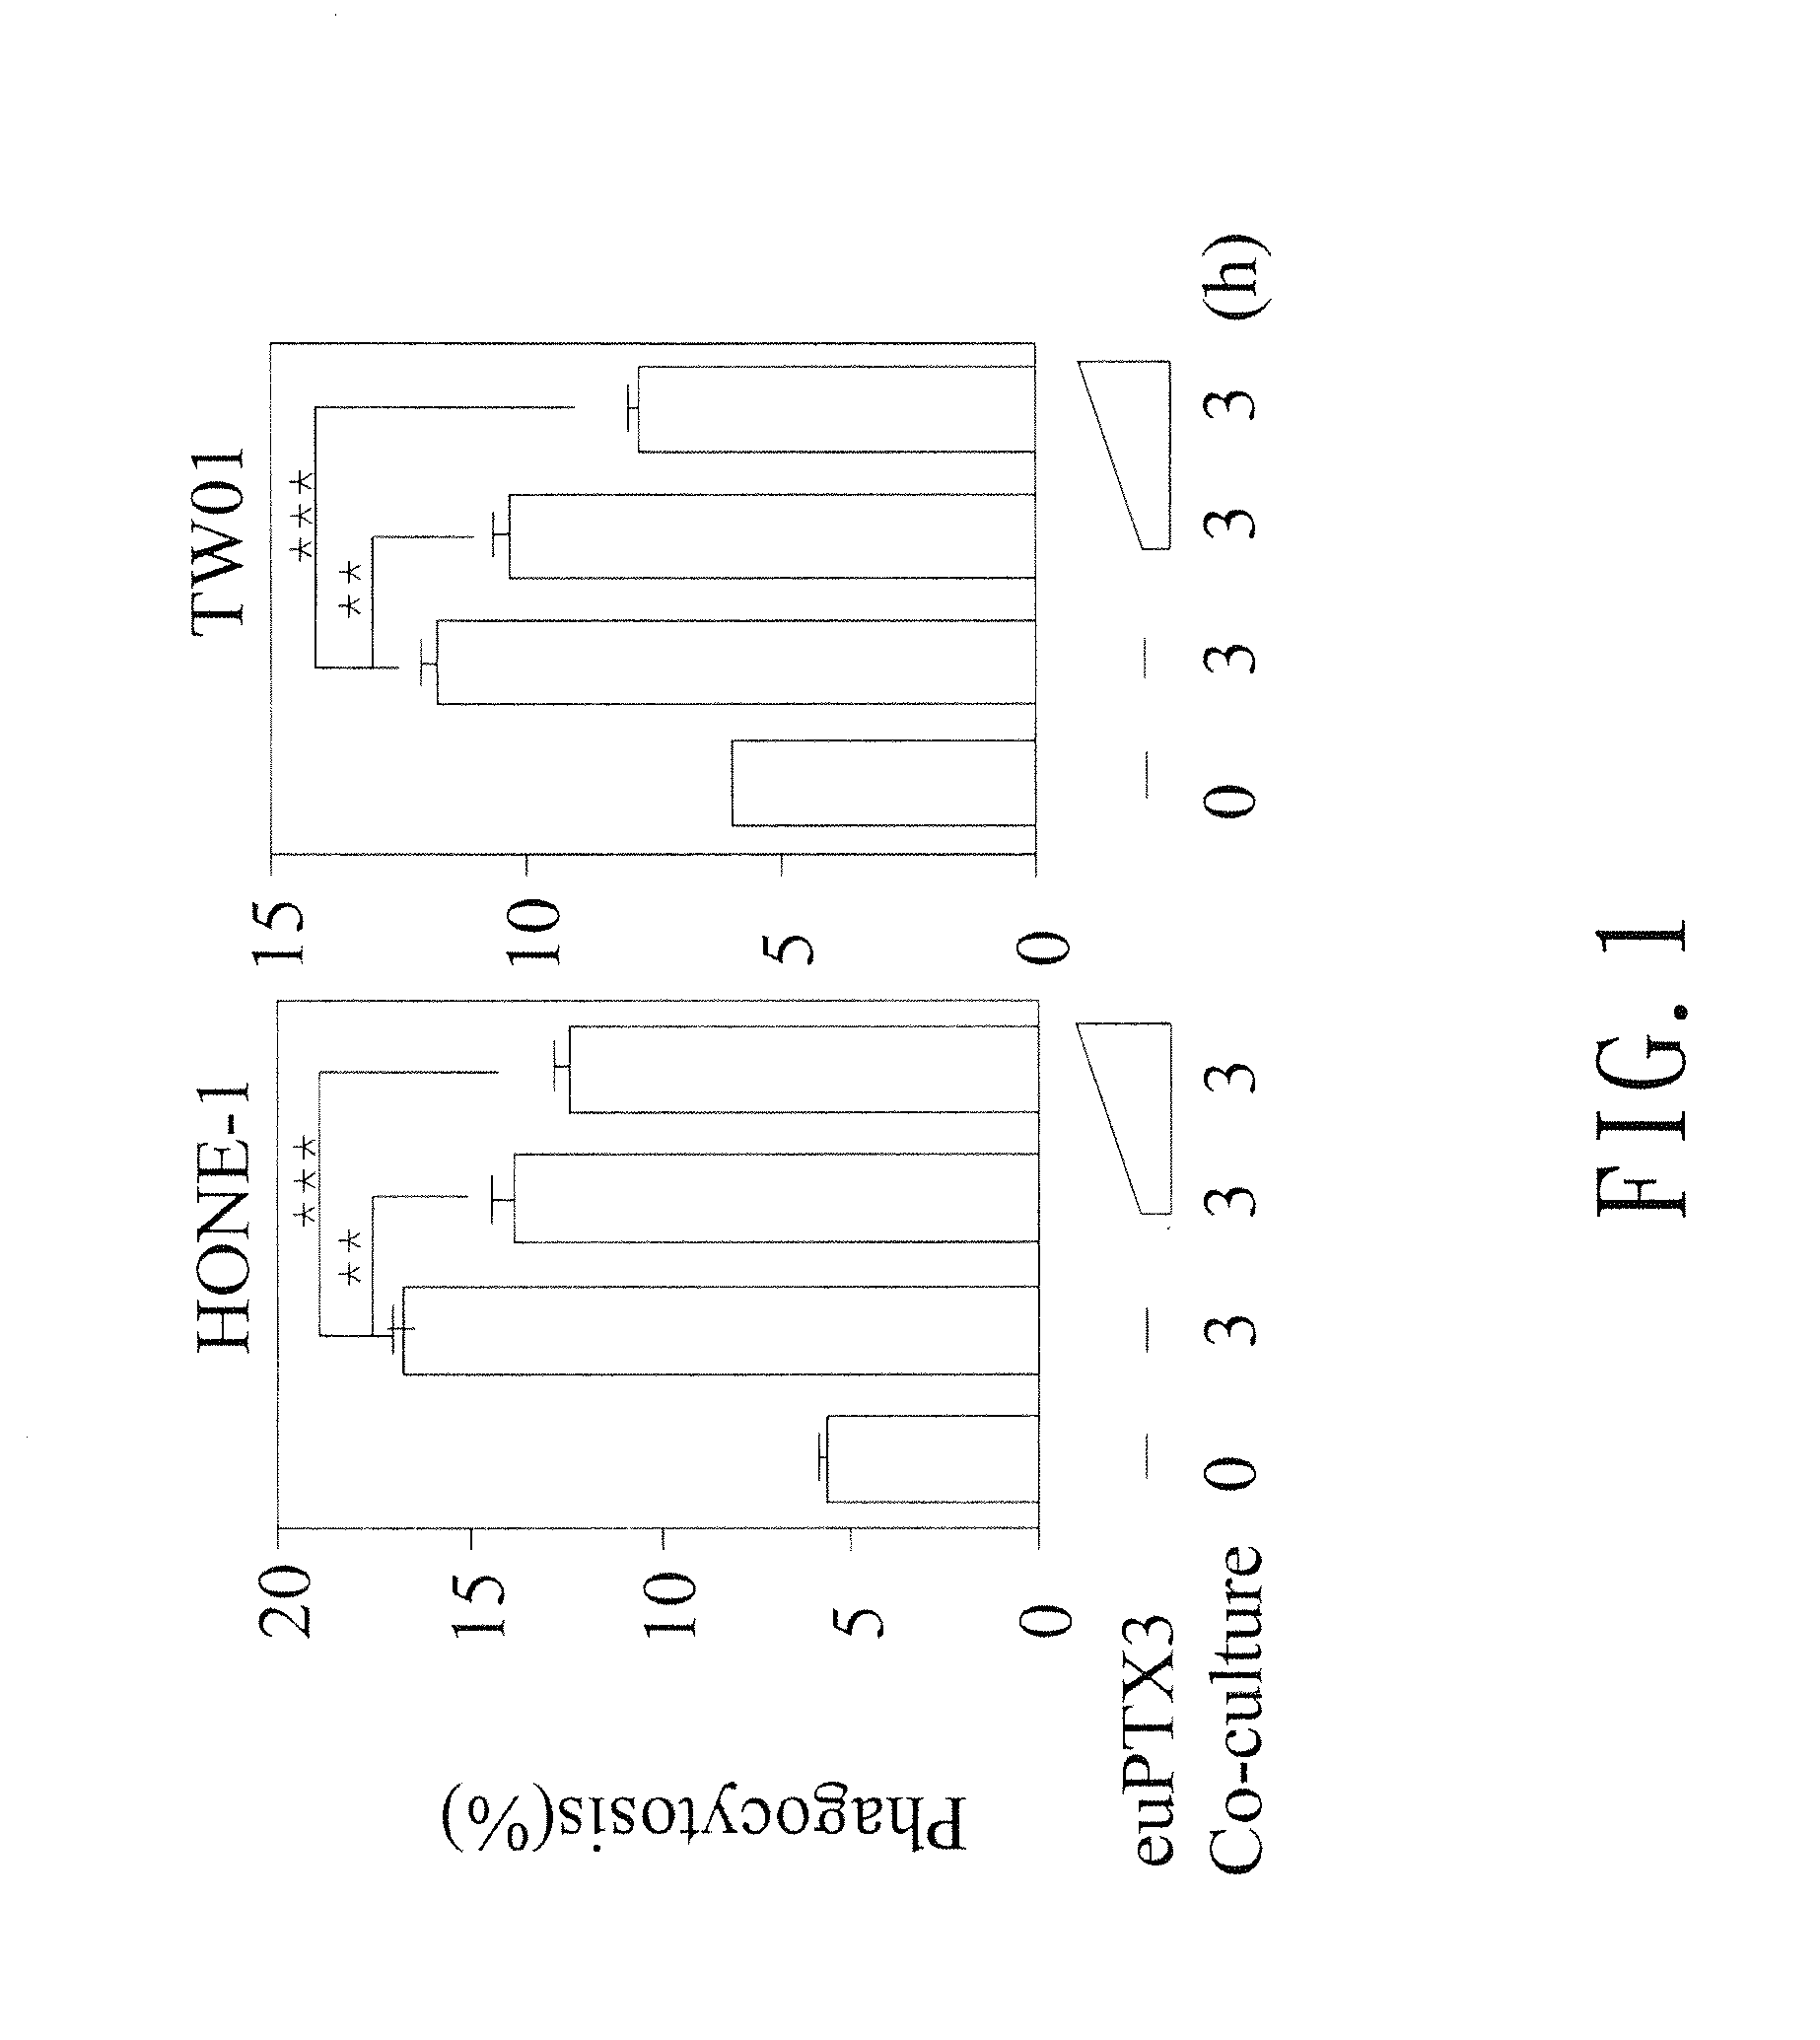 Amino acid sequence for inhibiting ptx3 to treat nasopharyngeal carcinoma